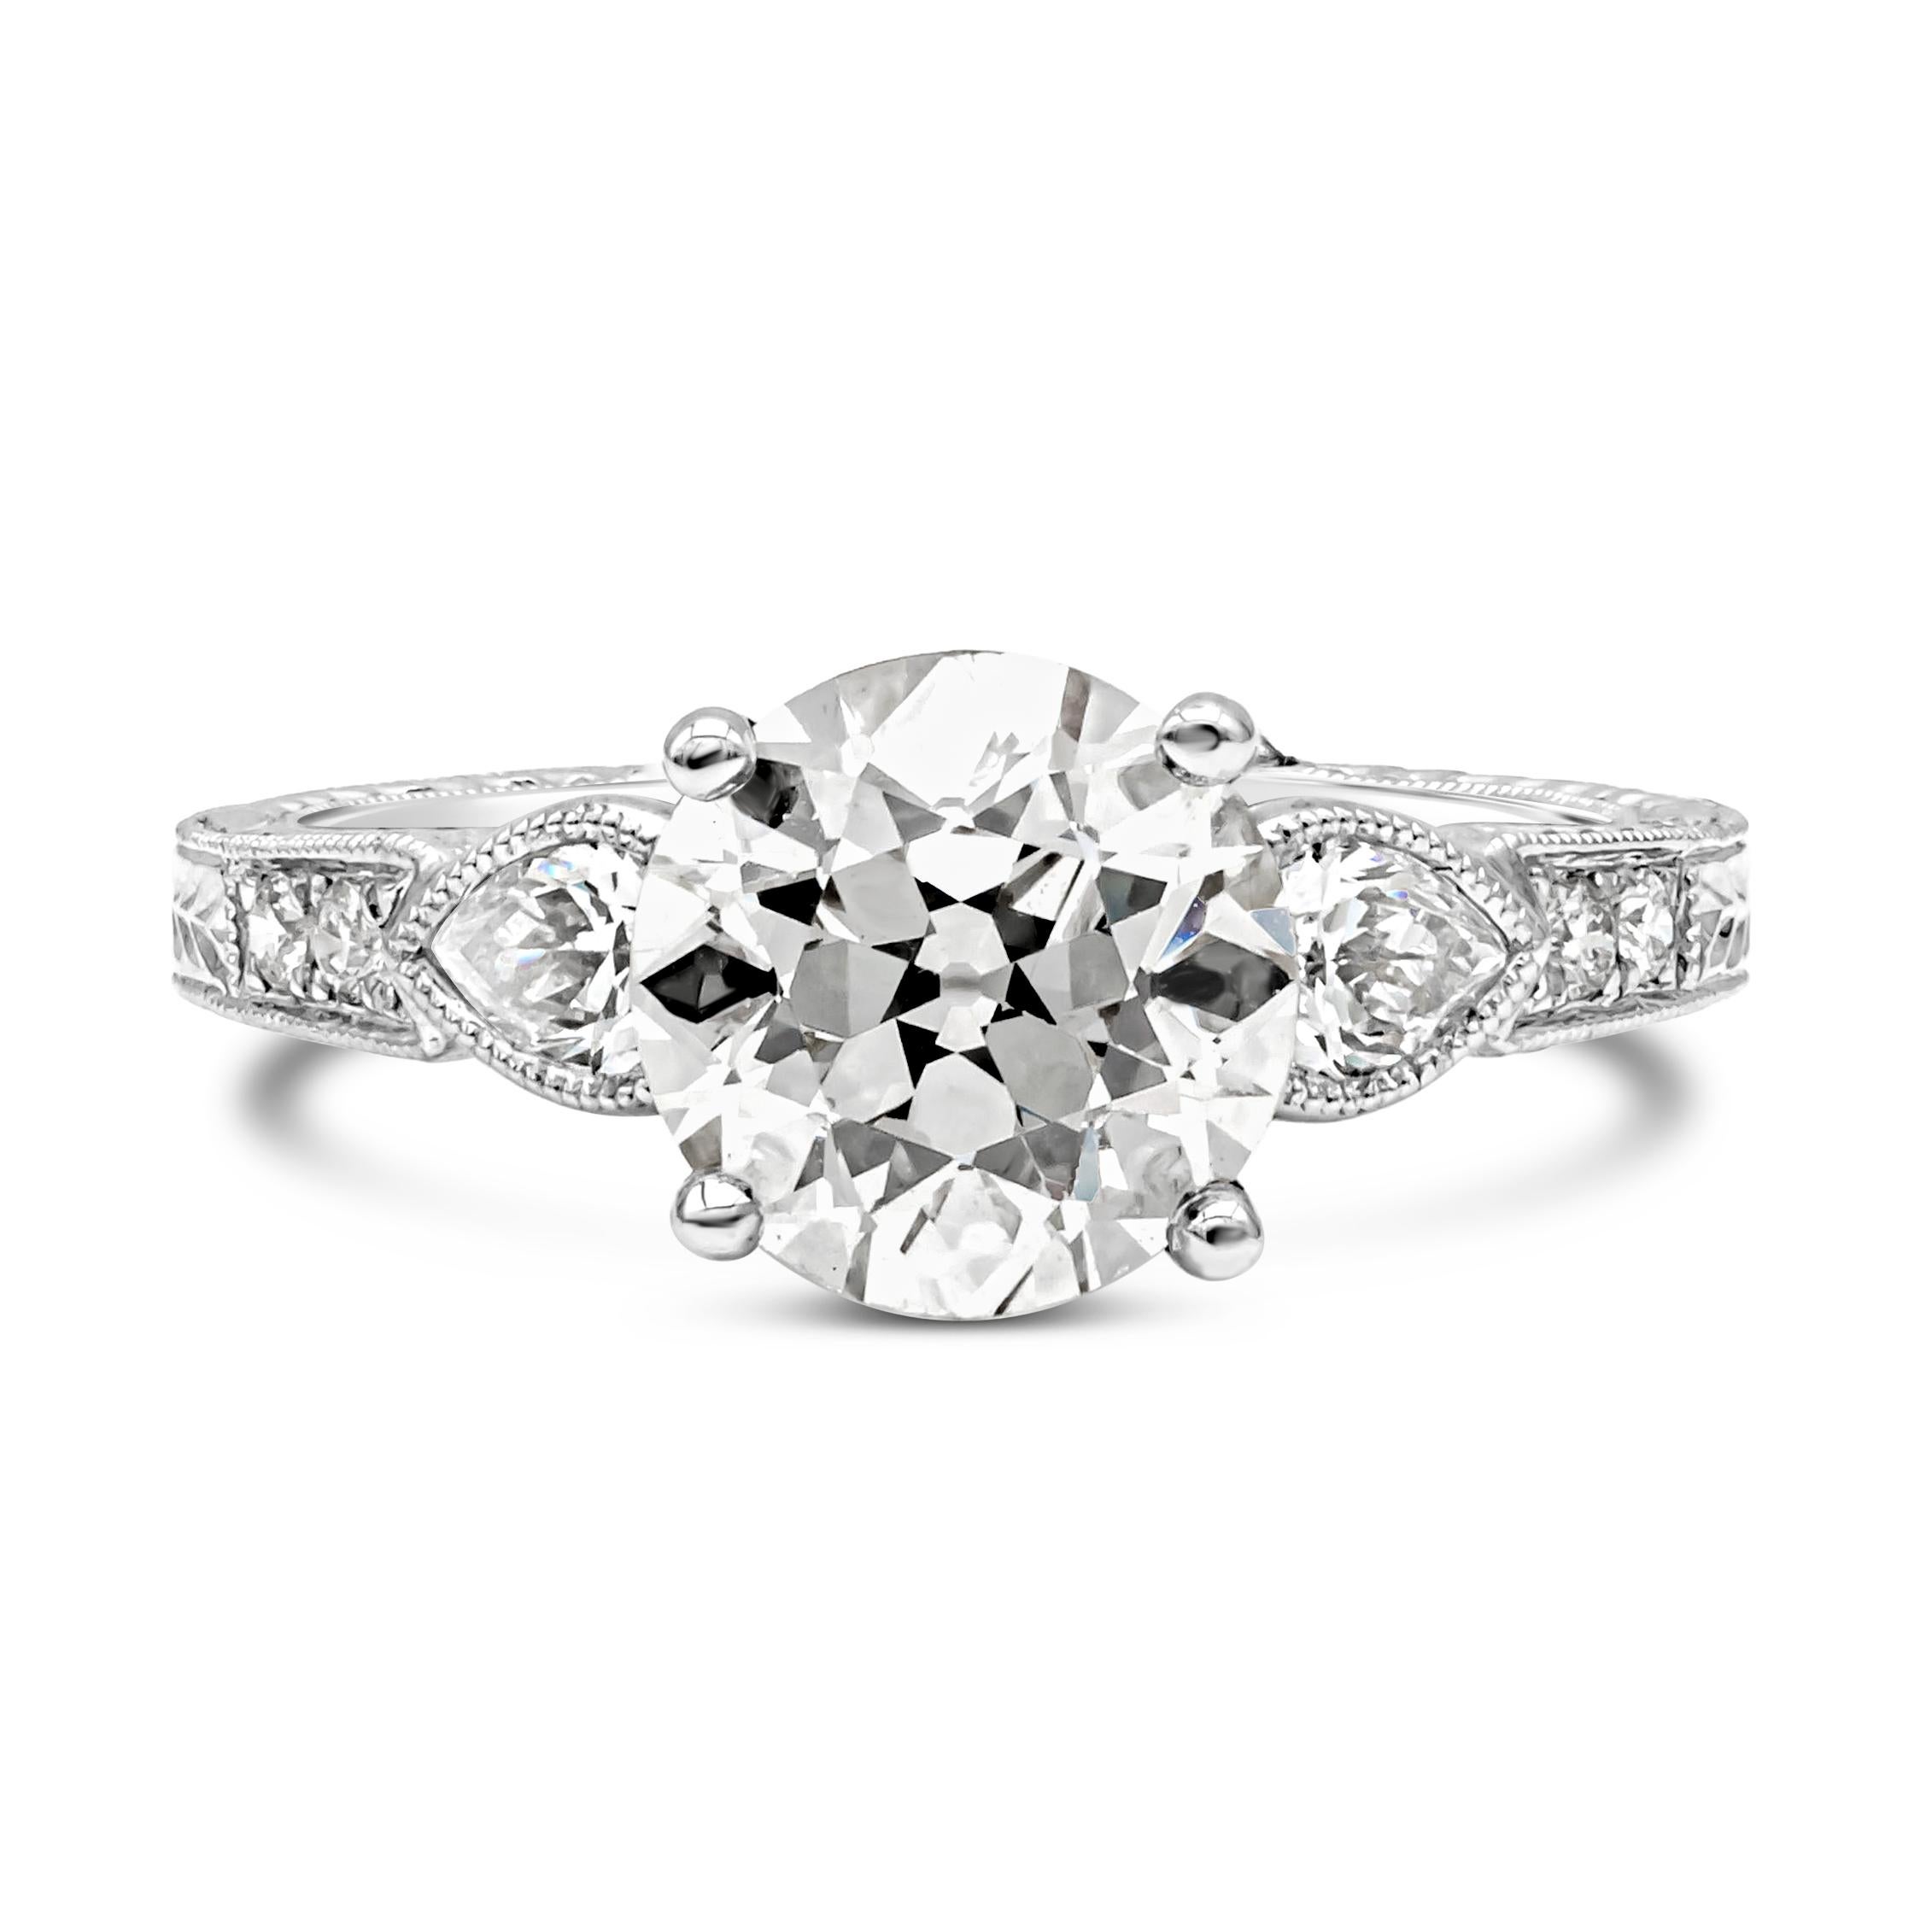 An antique-style diamond engagement ring showcasing a 2.31 carats old European cut diamond certified by GIA as M Color and VS1 in Clarity. Flanking the center are pear shape diamonds weighing 0.34 carats total, set in an 18k white gold bezel with